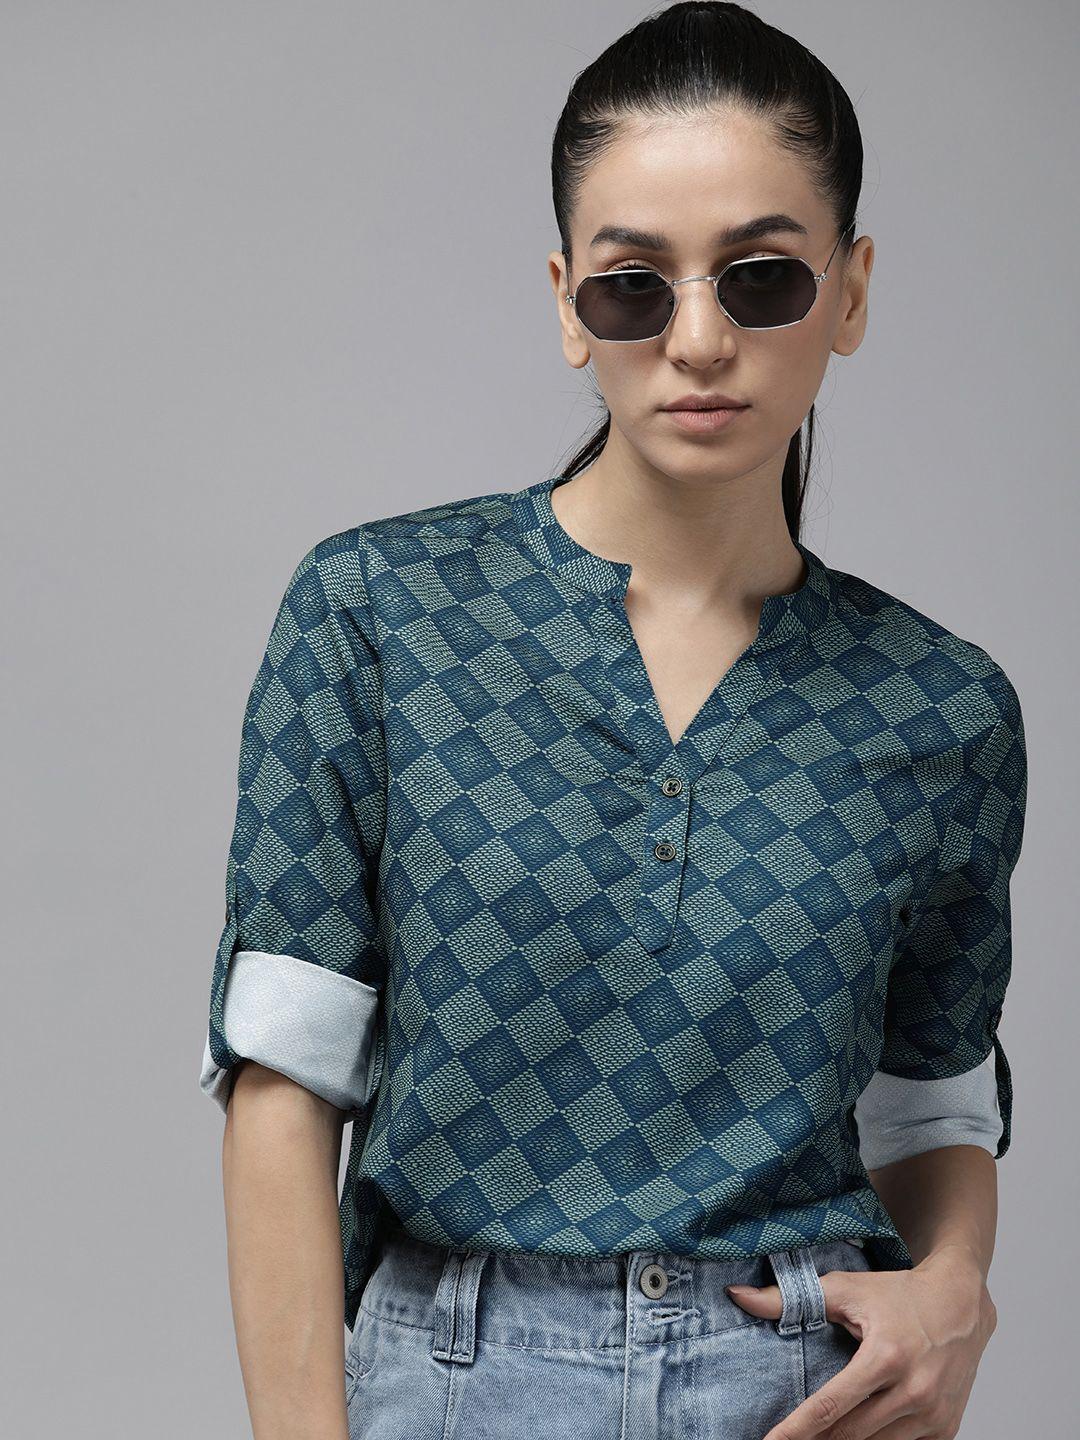 the roadster life co. geometric printed roll-up sleeves top